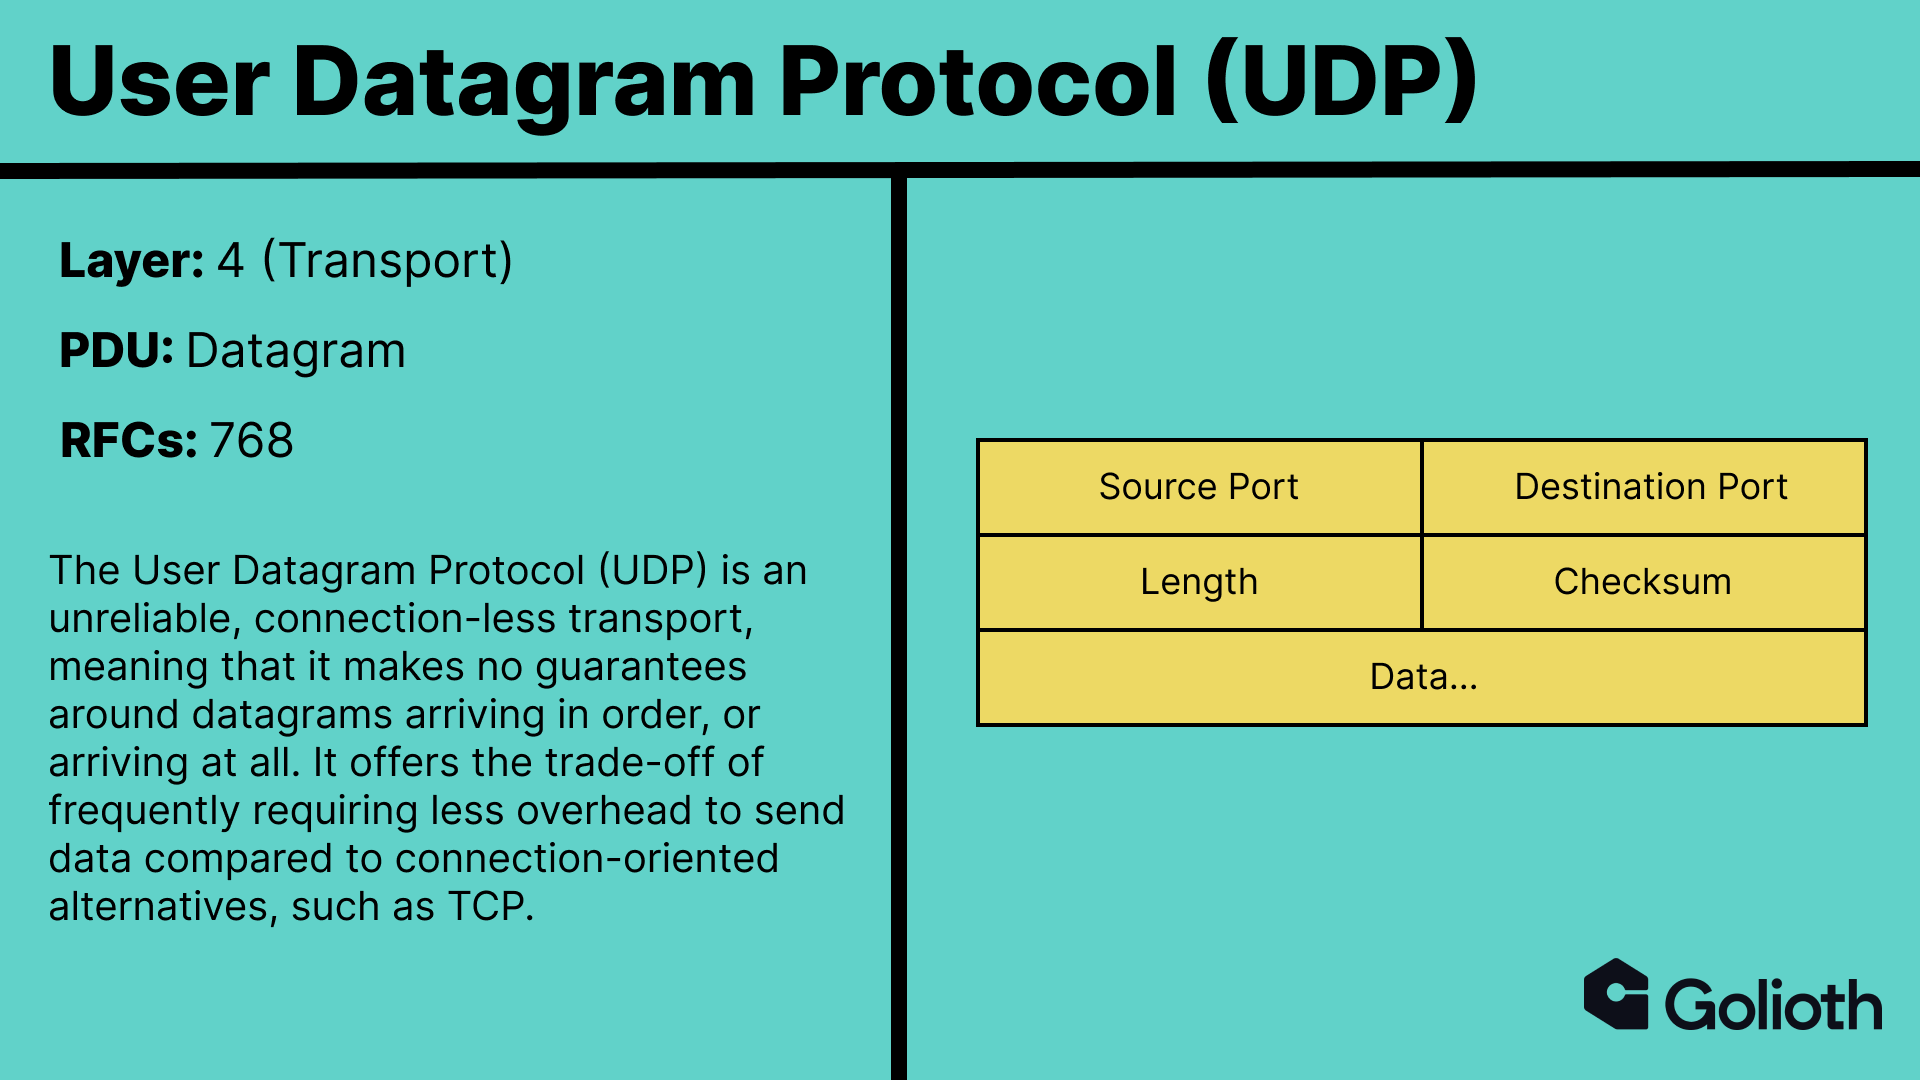 Description of the User Datagram Protocol (UDP) with a diagram.